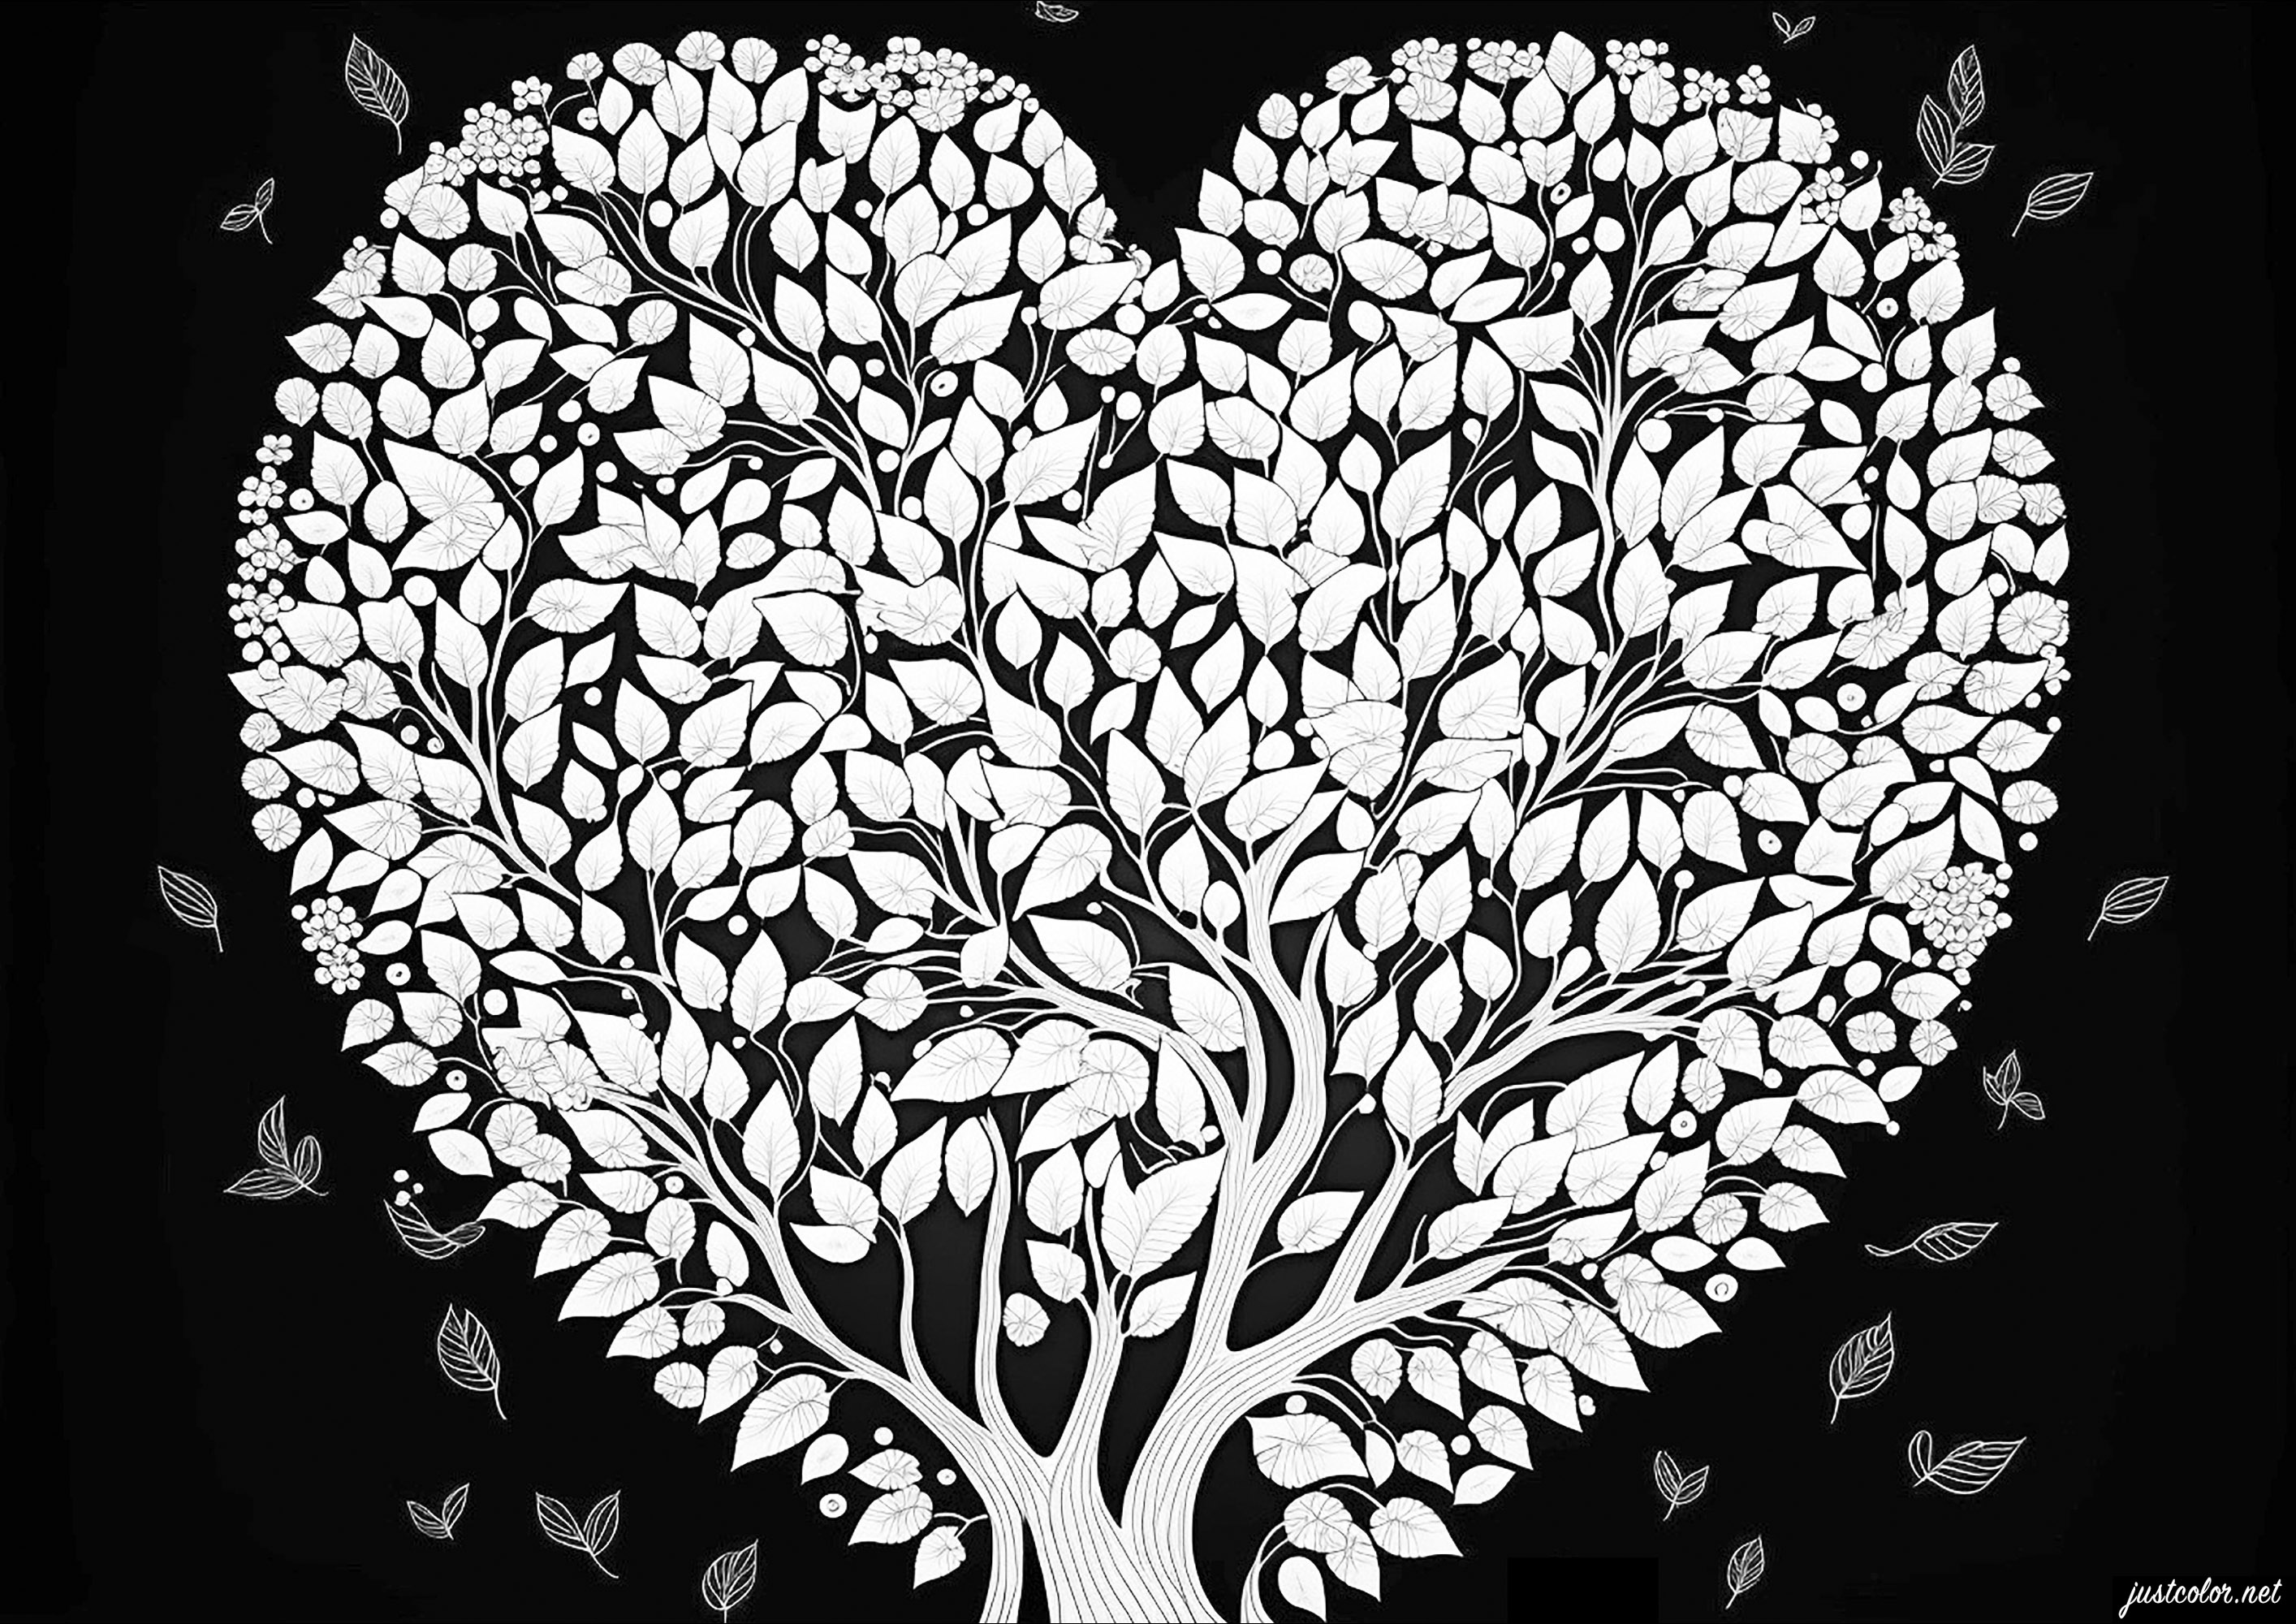 On a black background, color this beautiful heart-shaped tree, and its many elegant flowers